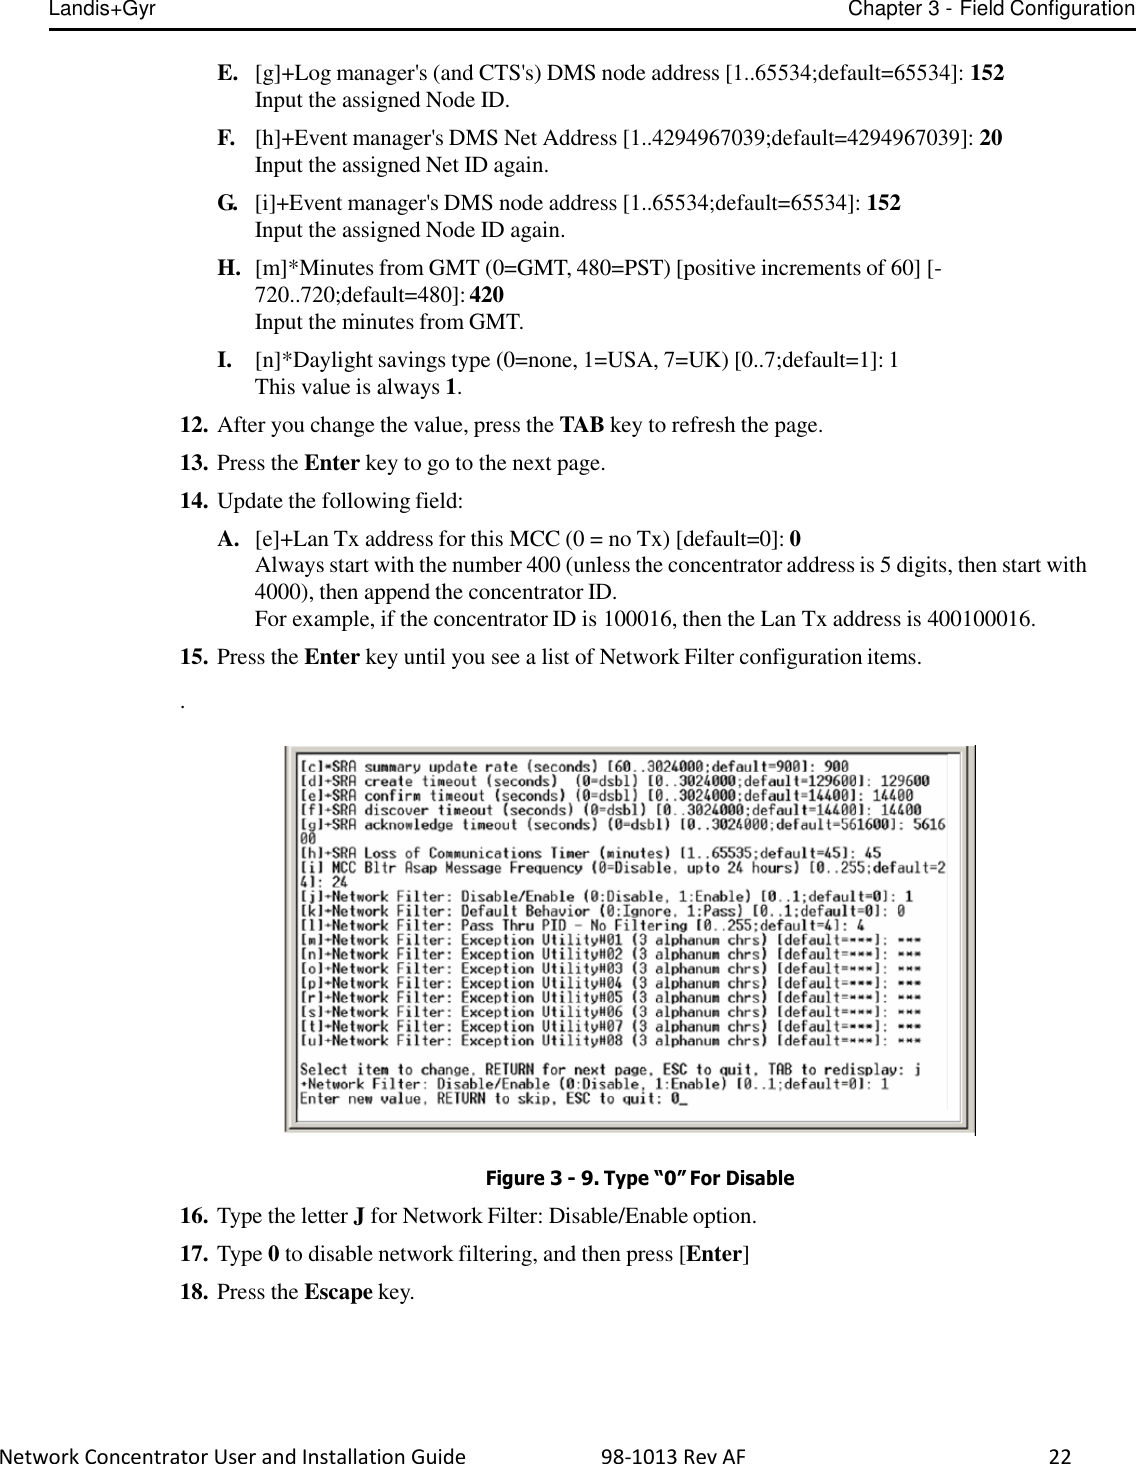 Landis+Gyr Chapter 3 - Field Configuration  Network Concentrator User and Installation Guide                          98-1013 Rev AF    22   E.   [g]+Log manager&apos;s (and CTS&apos;s) DMS node address [1..65534;default=65534]: 152 Input the assigned Node ID.  F.   [h]+Event manager&apos;s DMS Net Address [1..4294967039;default=4294967039]: 20 Input the assigned Net ID again.  G.   [i]+Event manager&apos;s DMS node address [1..65534;default=65534]: 152 Input the assigned Node ID again.  H.  [m]*Minutes from GMT (0=GMT, 480=PST) [positive increments of 60] [- 720..720;default=480]: 420 Input the minutes from GMT.  I. [n]*Daylight savings type (0=none, 1=USA, 7=UK) [0..7;default=1]: 1 This value is always 1.  12. After you change the value, press the TAB key to refresh the page.  13. Press the Enter key to go to the next page.  14. Update the following field:  A.  [e]+Lan Tx address for this MCC (0 = no Tx) [default=0]: 0 Always start with the number 400 (unless the concentrator address is 5 digits, then start with 4000), then append the concentrator ID. For example, if the concentrator ID is 100016, then the Lan Tx address is 400100016.  15. Press the Enter key until you see a list of Network Filter configuration items.  .     Figure 3 - 9. Type “0” For Disable  16. Type the letter J for Network Filter: Disable/Enable option.  17. Type 0 to disable network filtering, and then press [Enter]  18. Press the Escape key. 